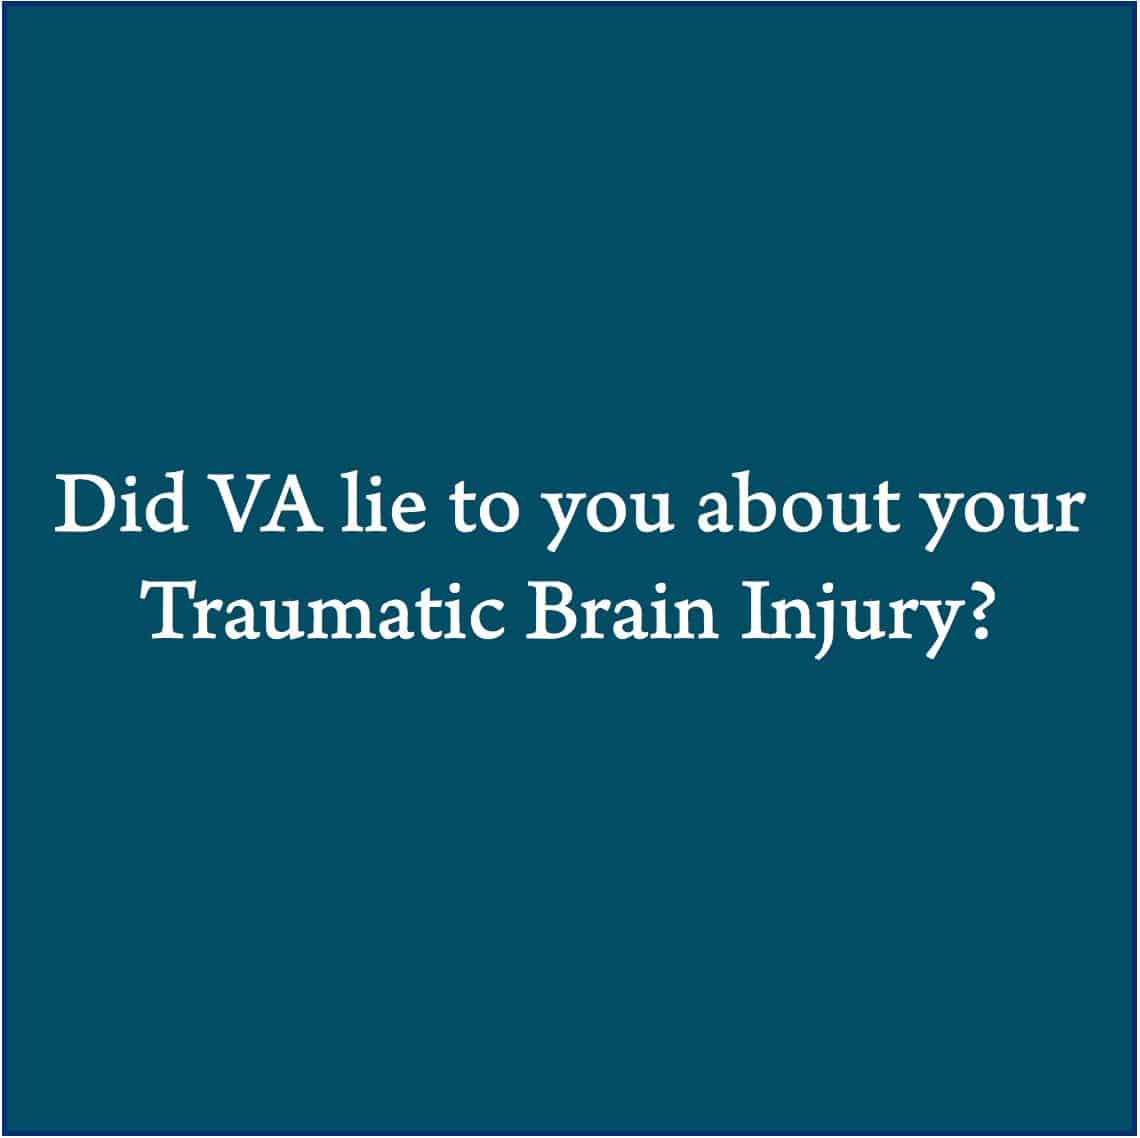 Is VA Lying About The Severity Of Your Traumatic Brain Injury?